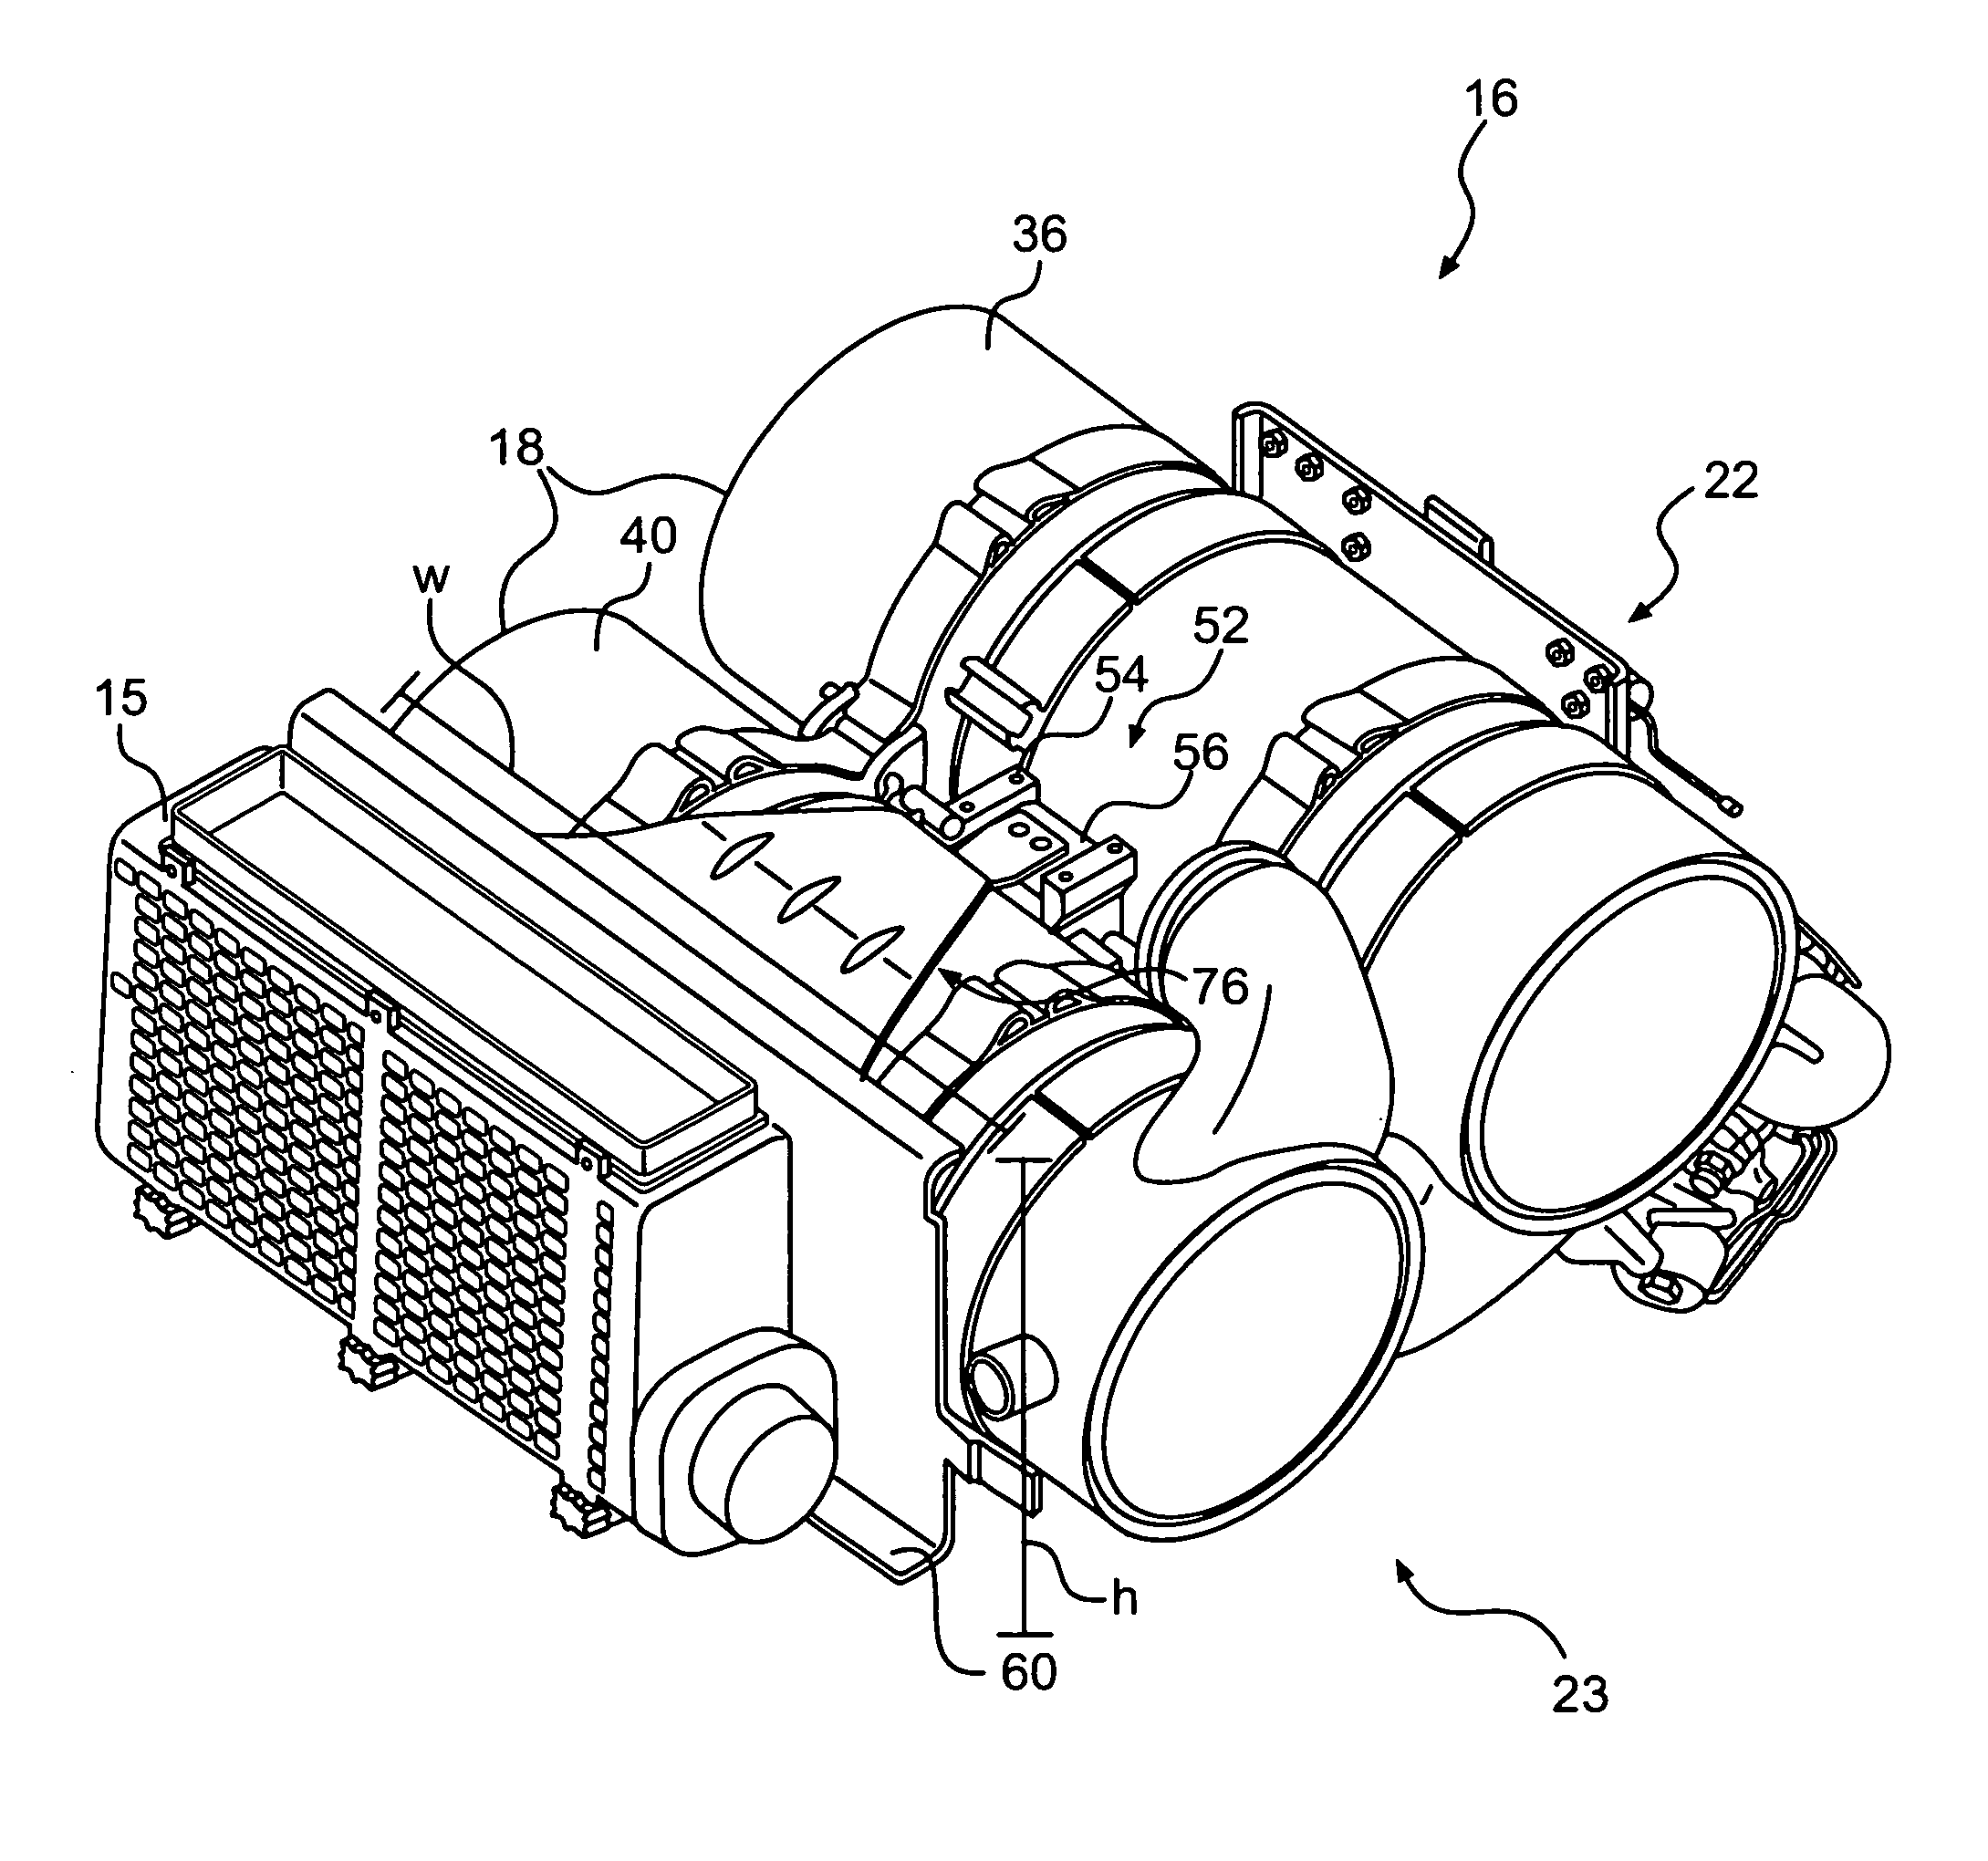 Exhaust system device with mounting bracket